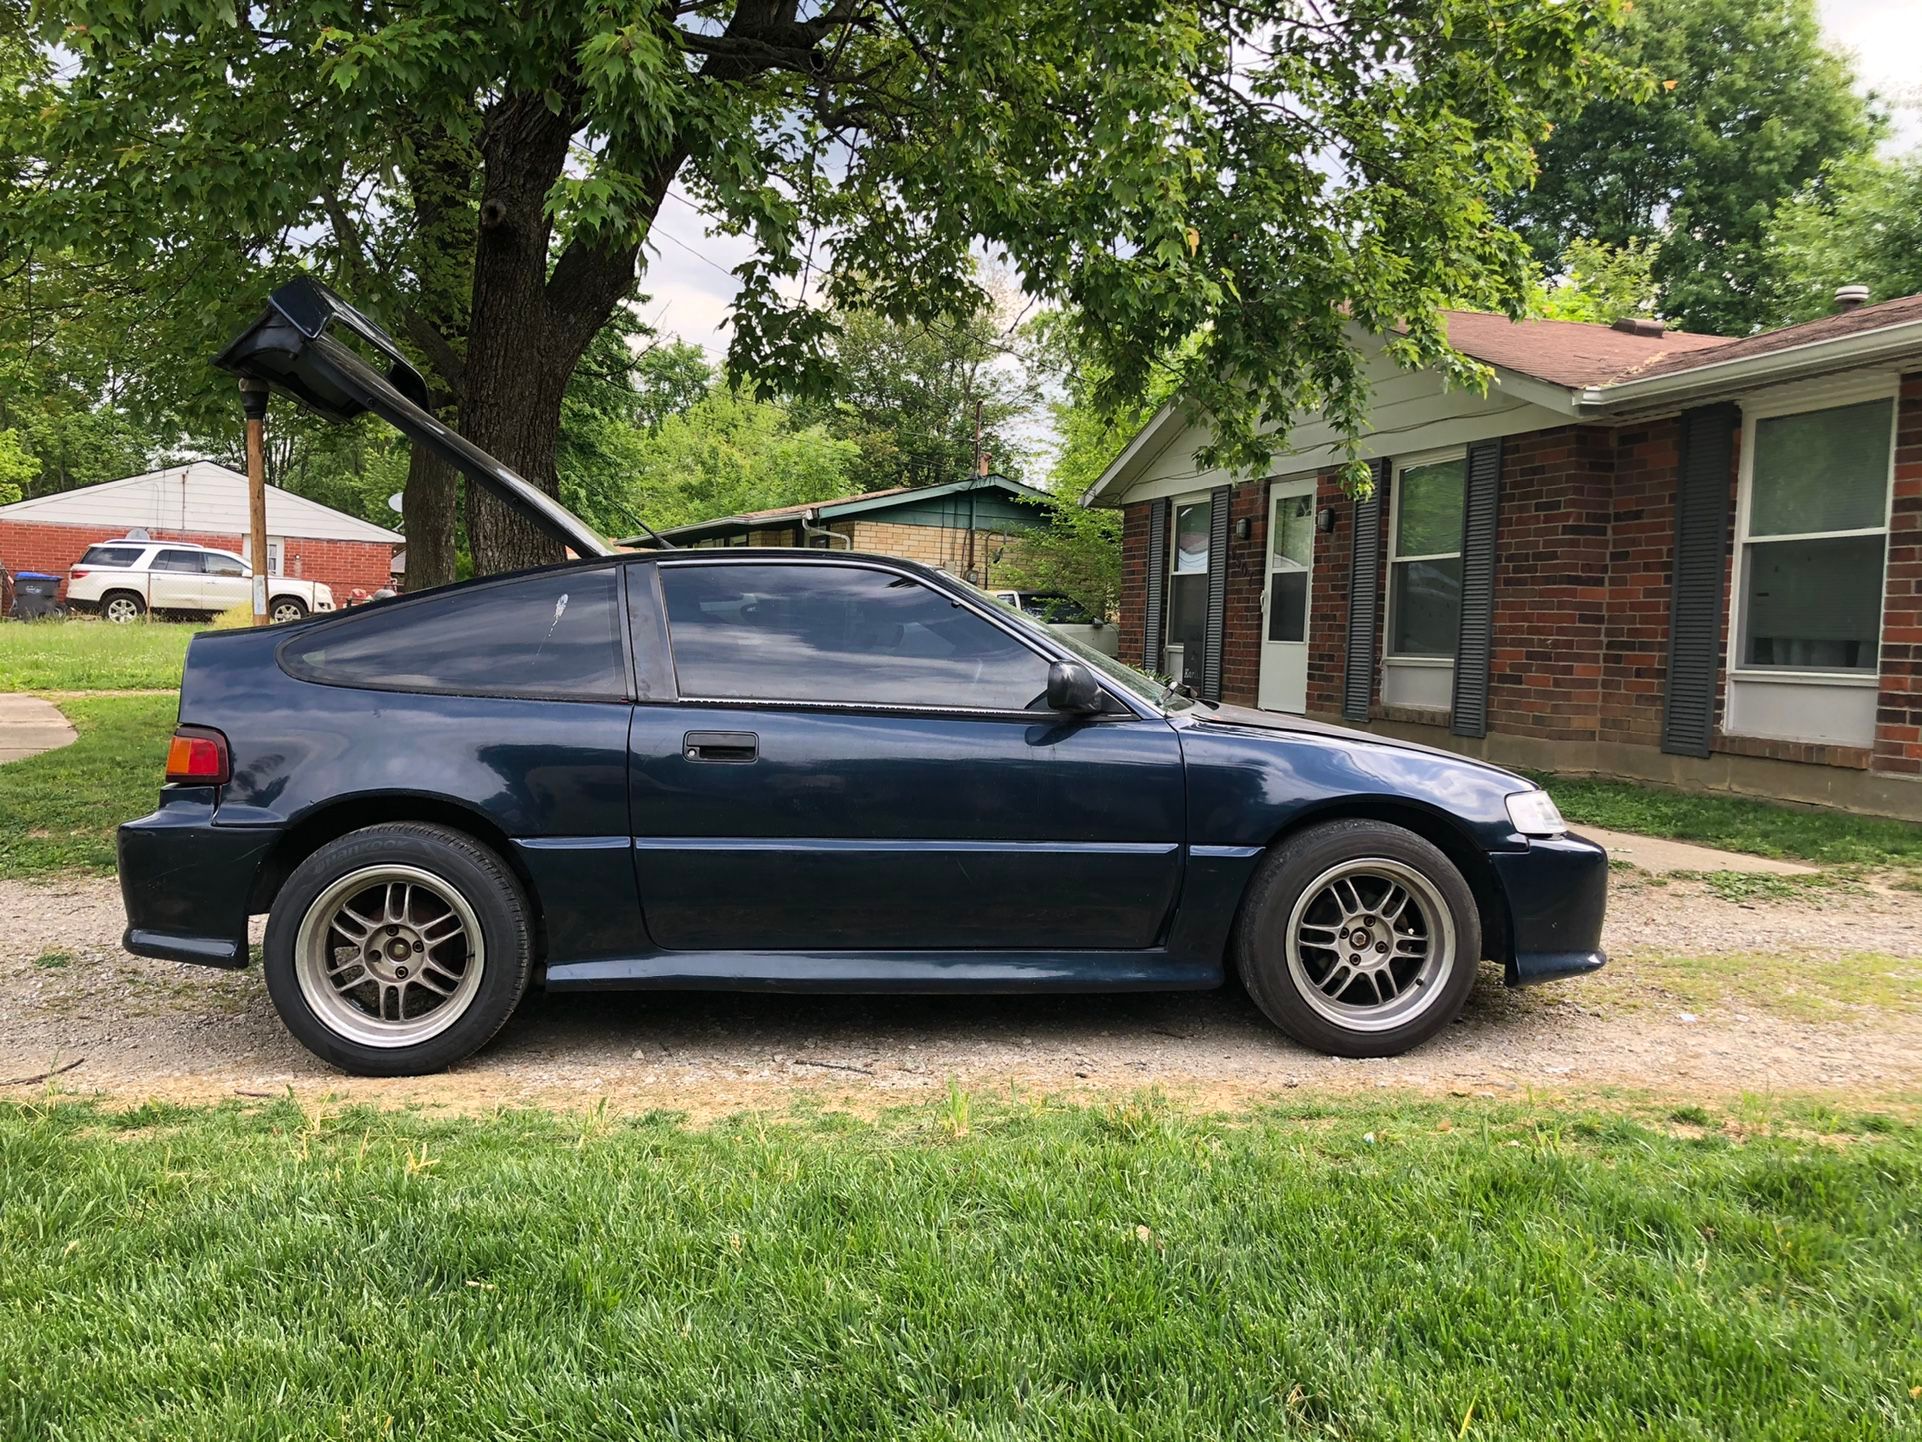 Honda CRX: The sports car that is a good project car.